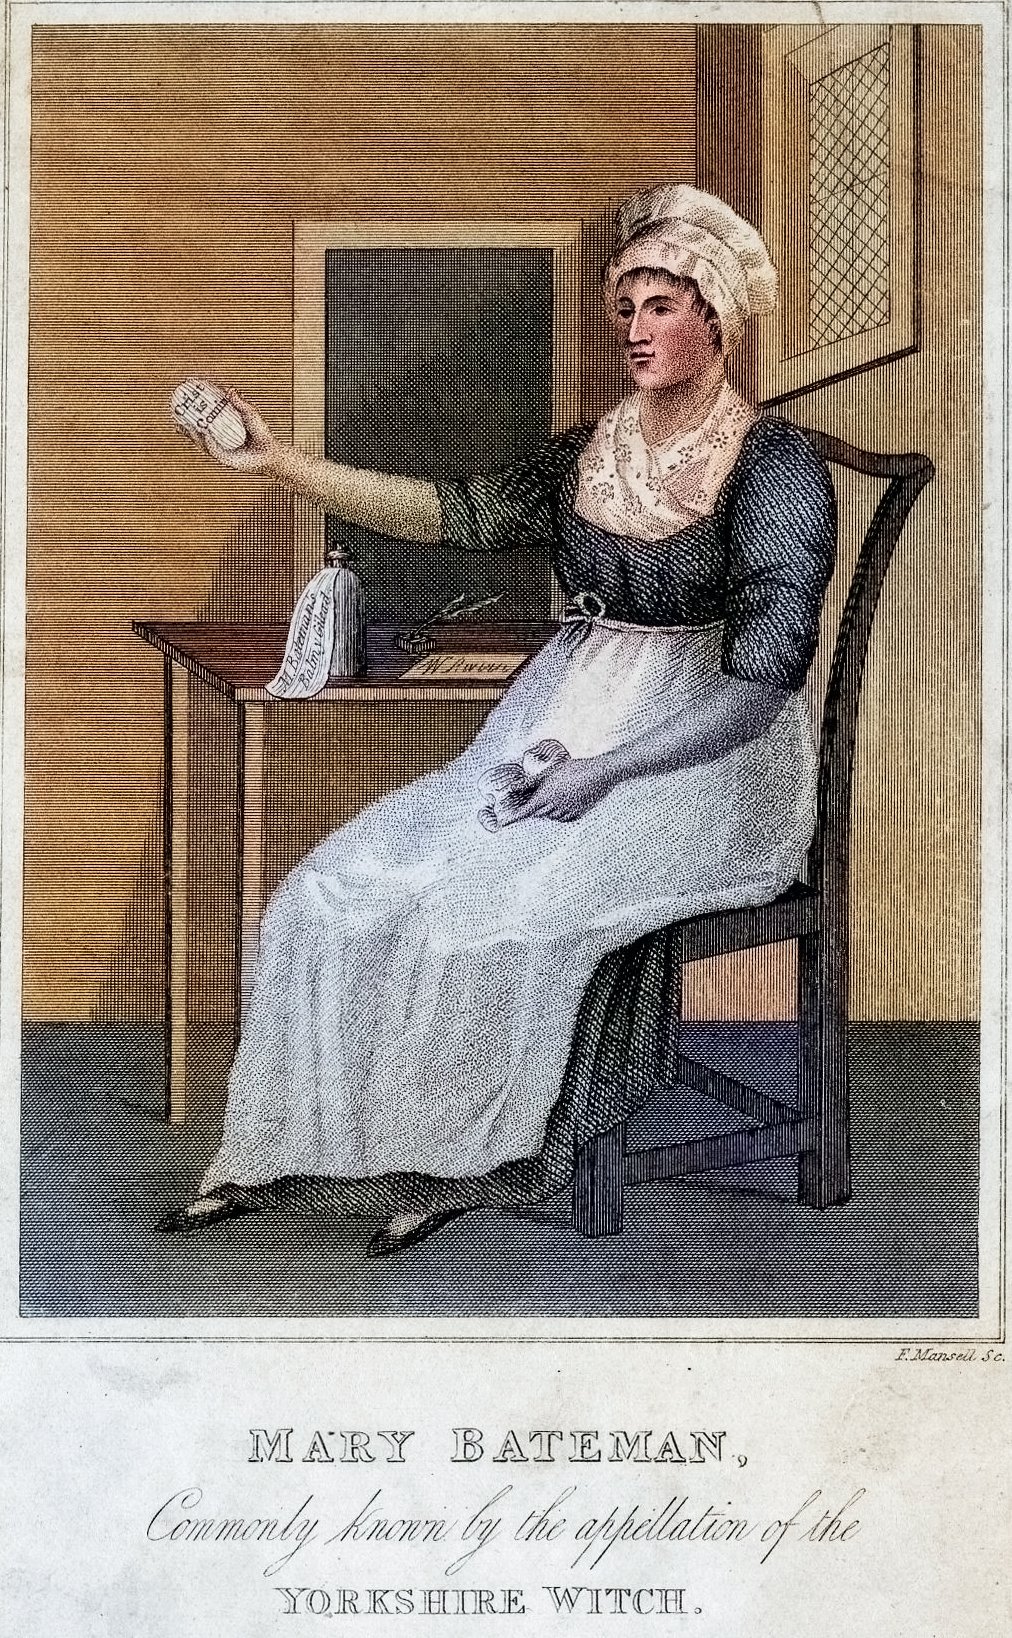 Full-length portrait of Mary Bateman, known as the Yorkshire Witch, seated to the left on a chair. In her right hand, she holds an oval object inscribed with “Crist is comin”. A table beside her displays a bottle marked “M. Bateman's / Balm & Gileard.”, an inkwell, quill pens, and a paper with”'W Rwvvi”. She is dressed in a bonnet, an apron over her dress, and a patterned scarf.